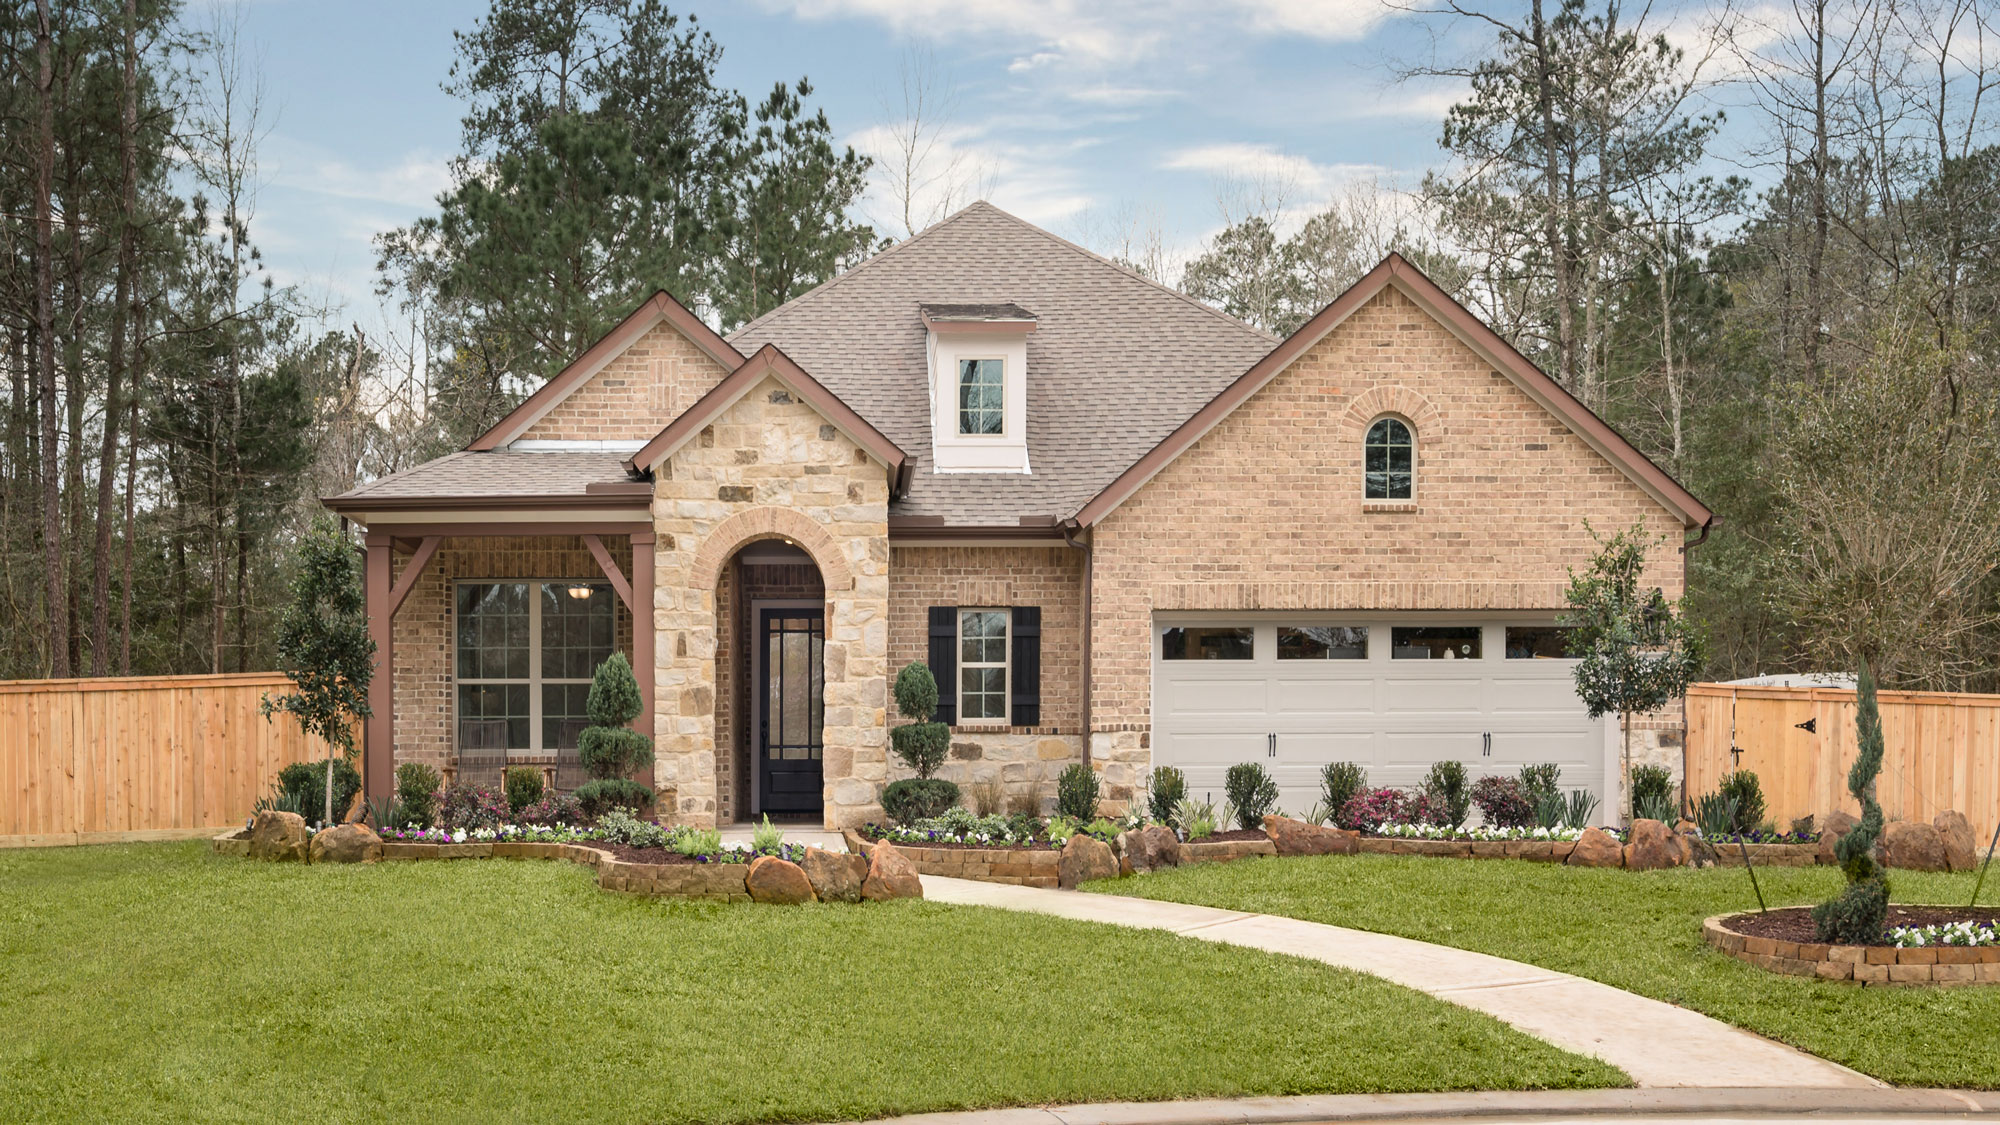 Announcing David Weekley Homes as the Newest Builder in The Woodlands Hills